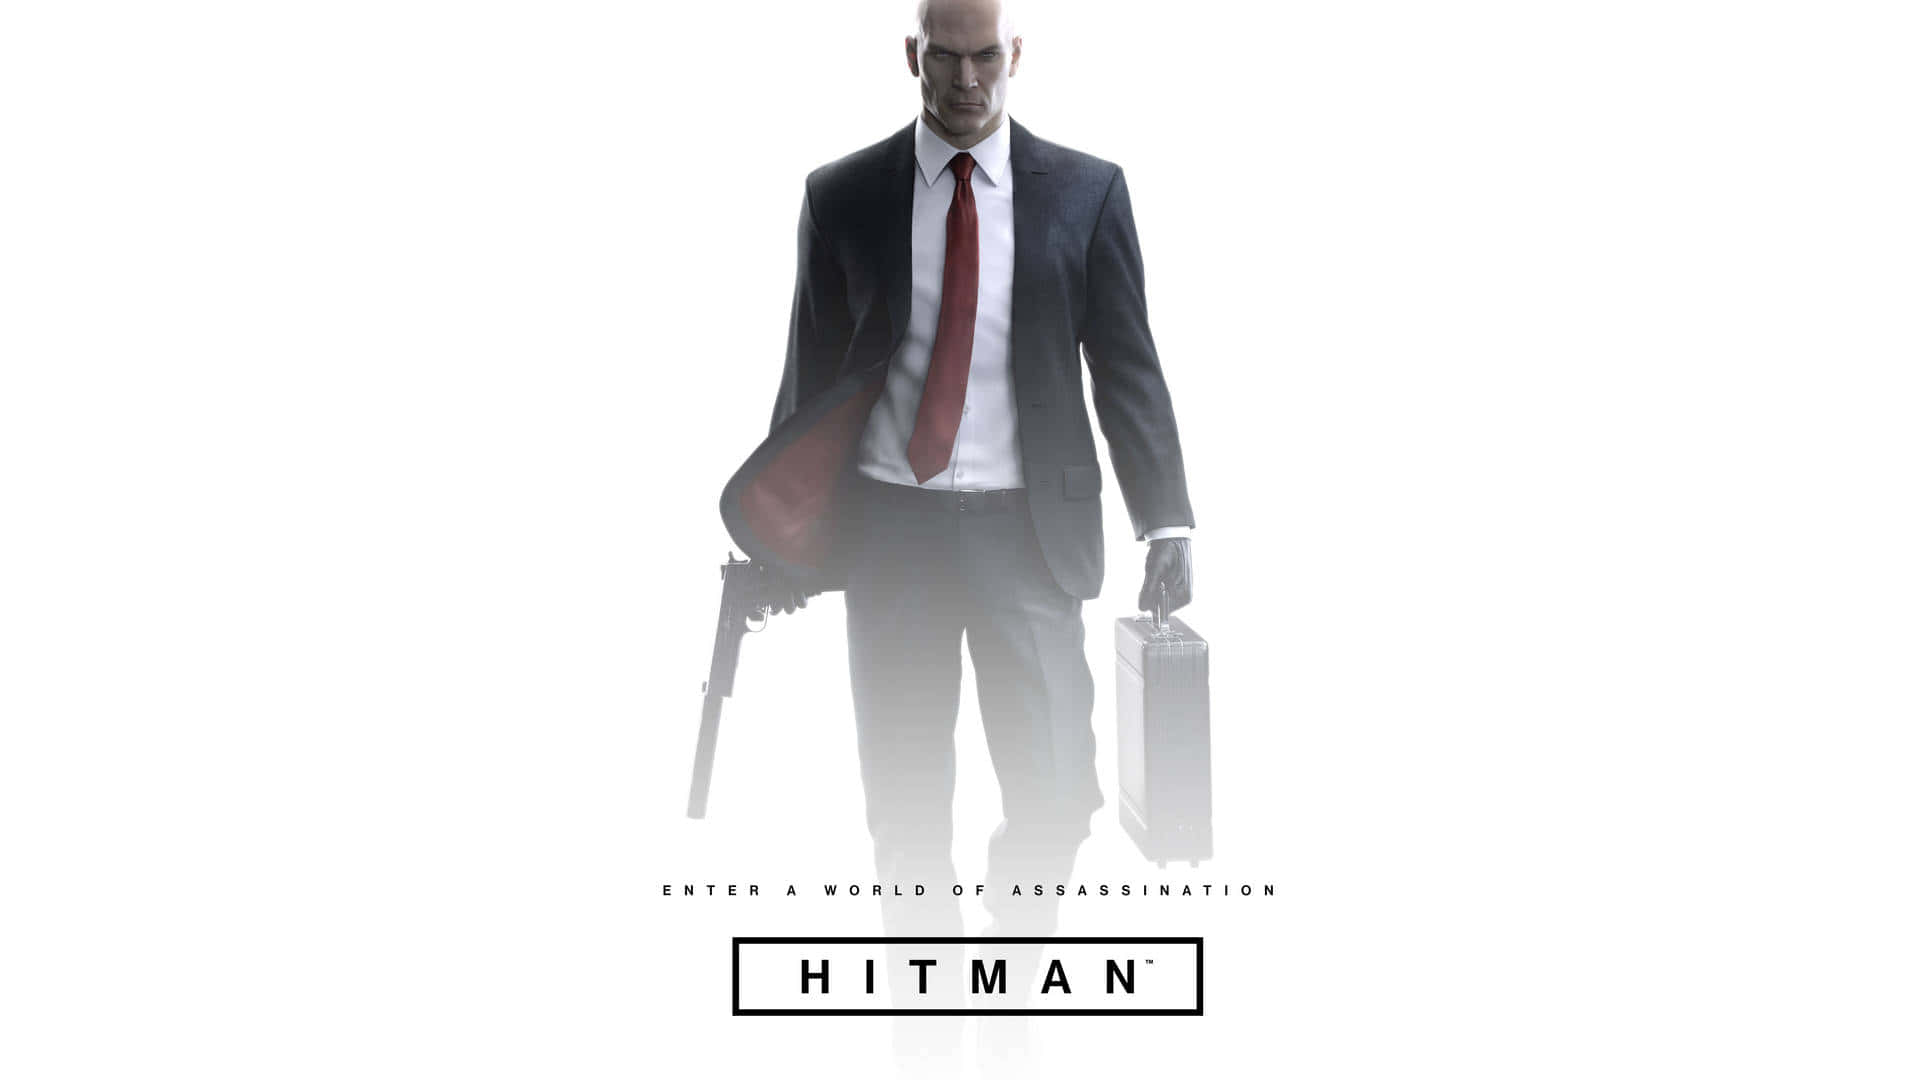 Agent 47 is back in Hitman: Absolution